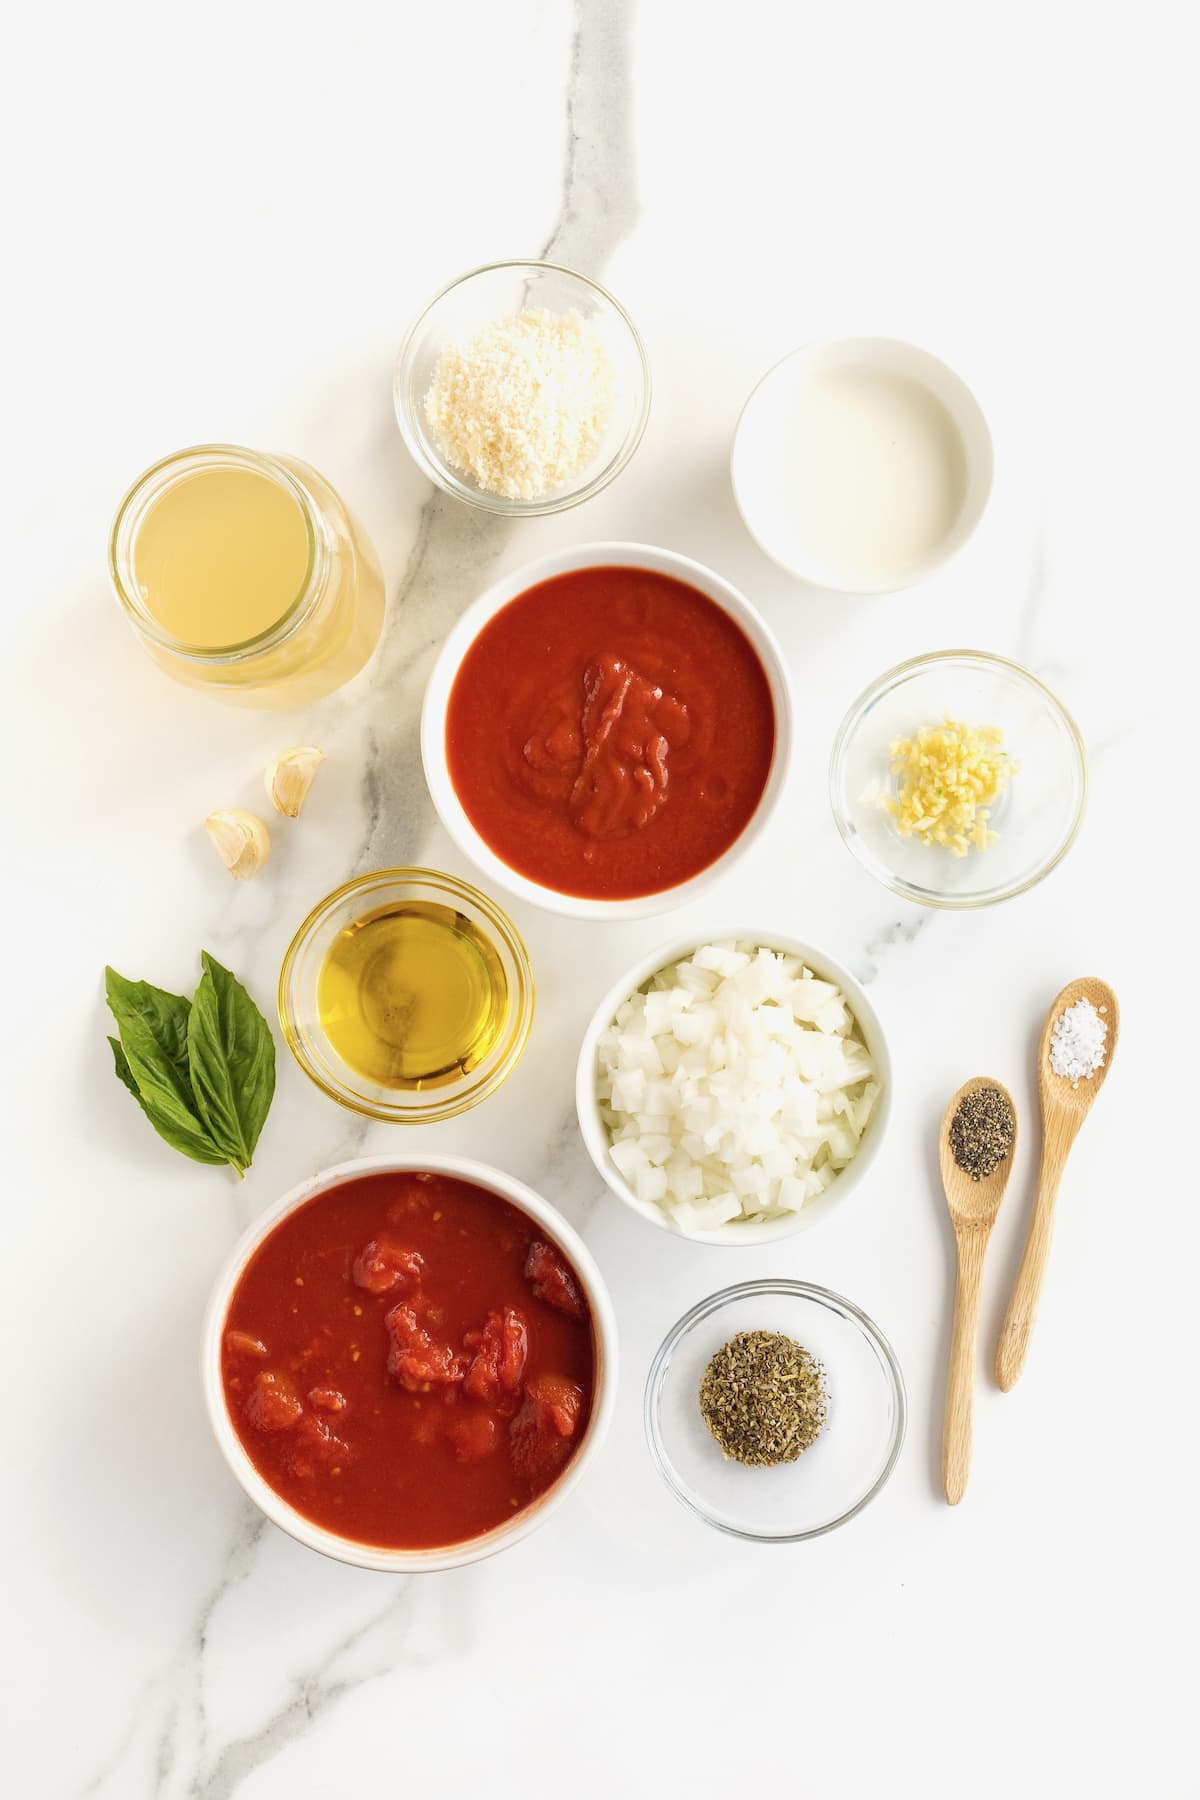 All the ingredients of making homemade tomato soup in small white glass dishes on a white counter top.